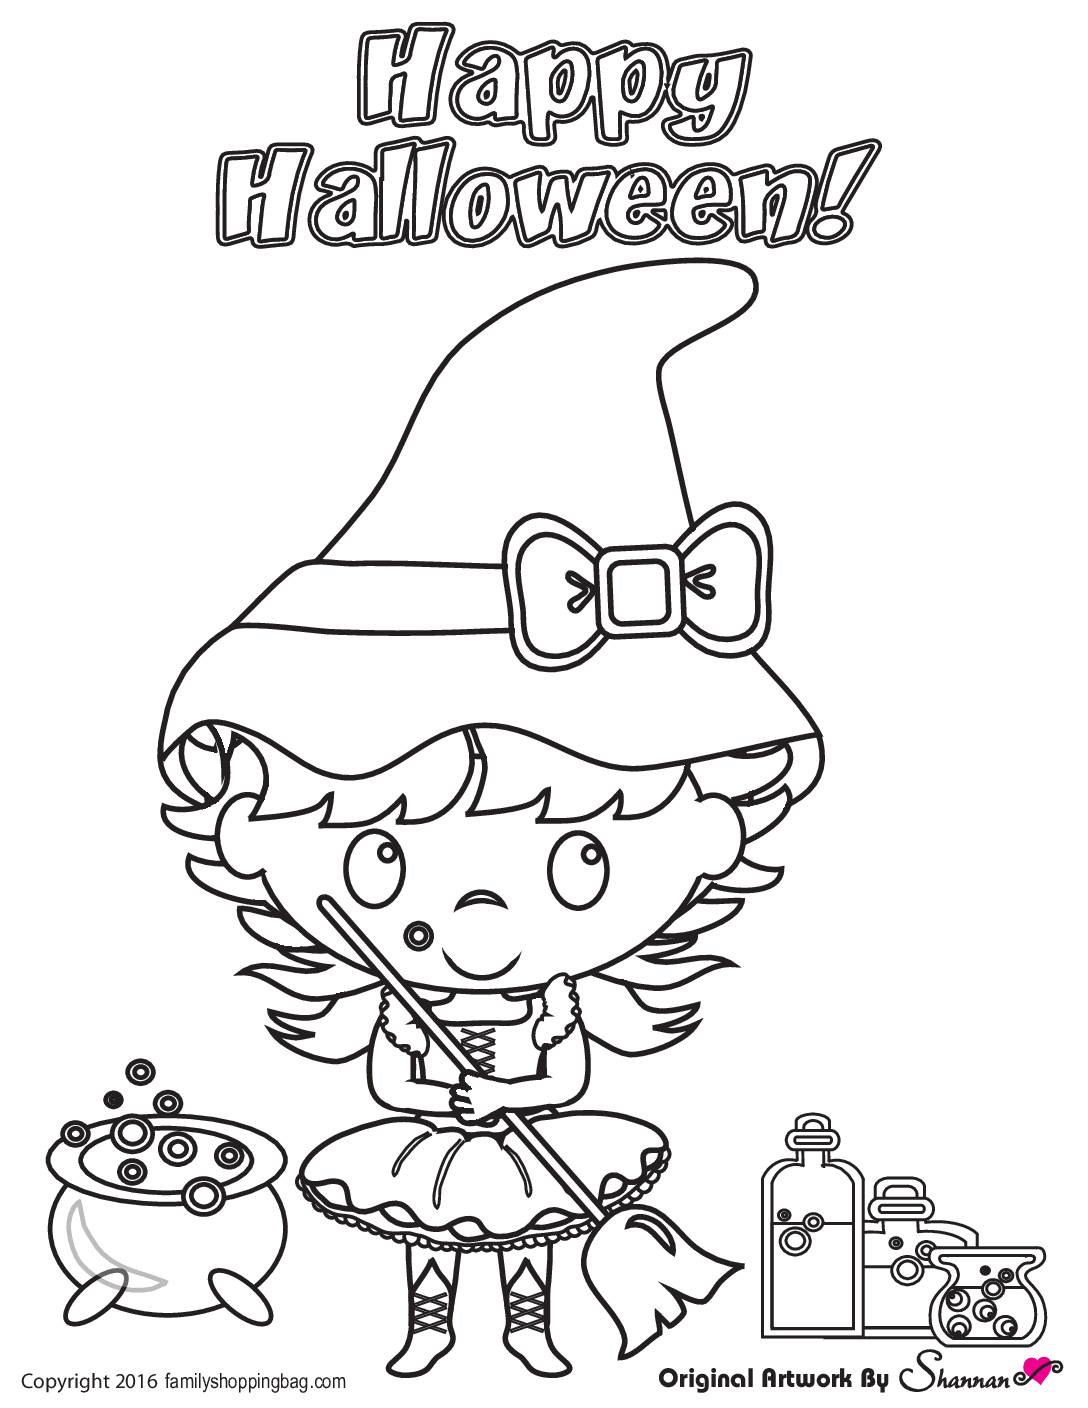 Halloween Coloring Page 3